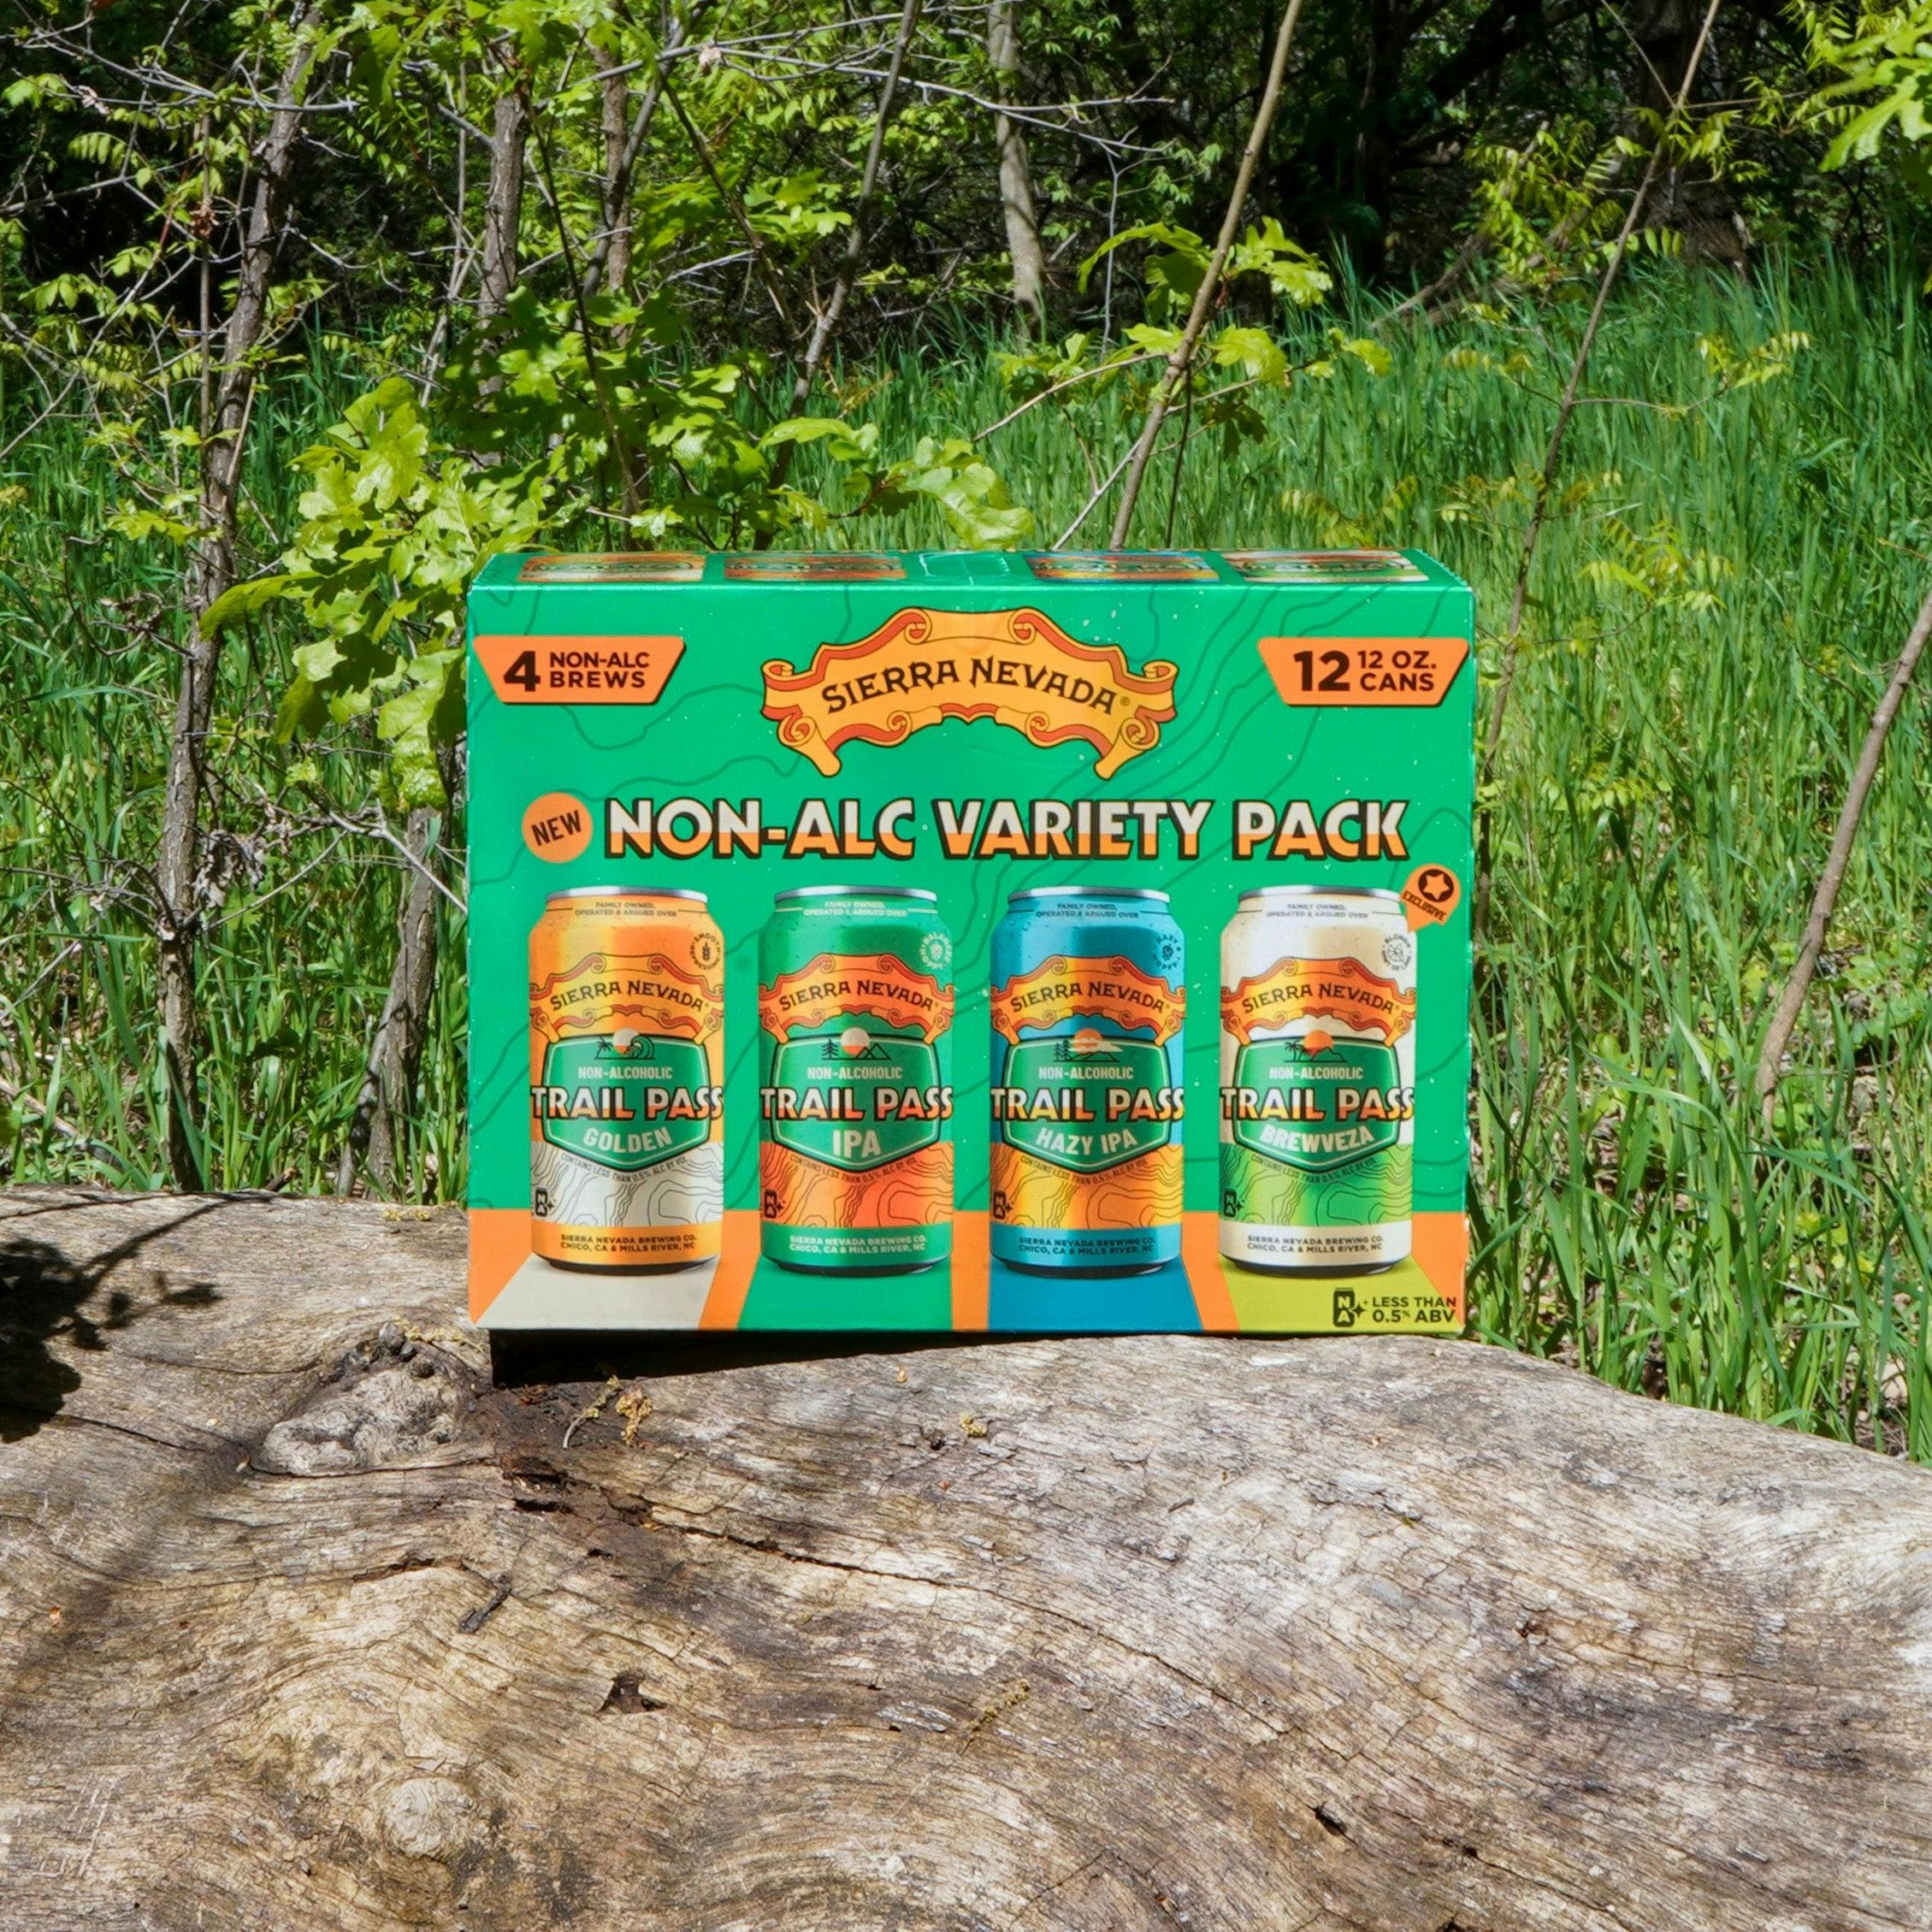 Sierra Nevada Brewing Co. Trail Pass Variety Pack box sitting outside on a log in front of a wooded area